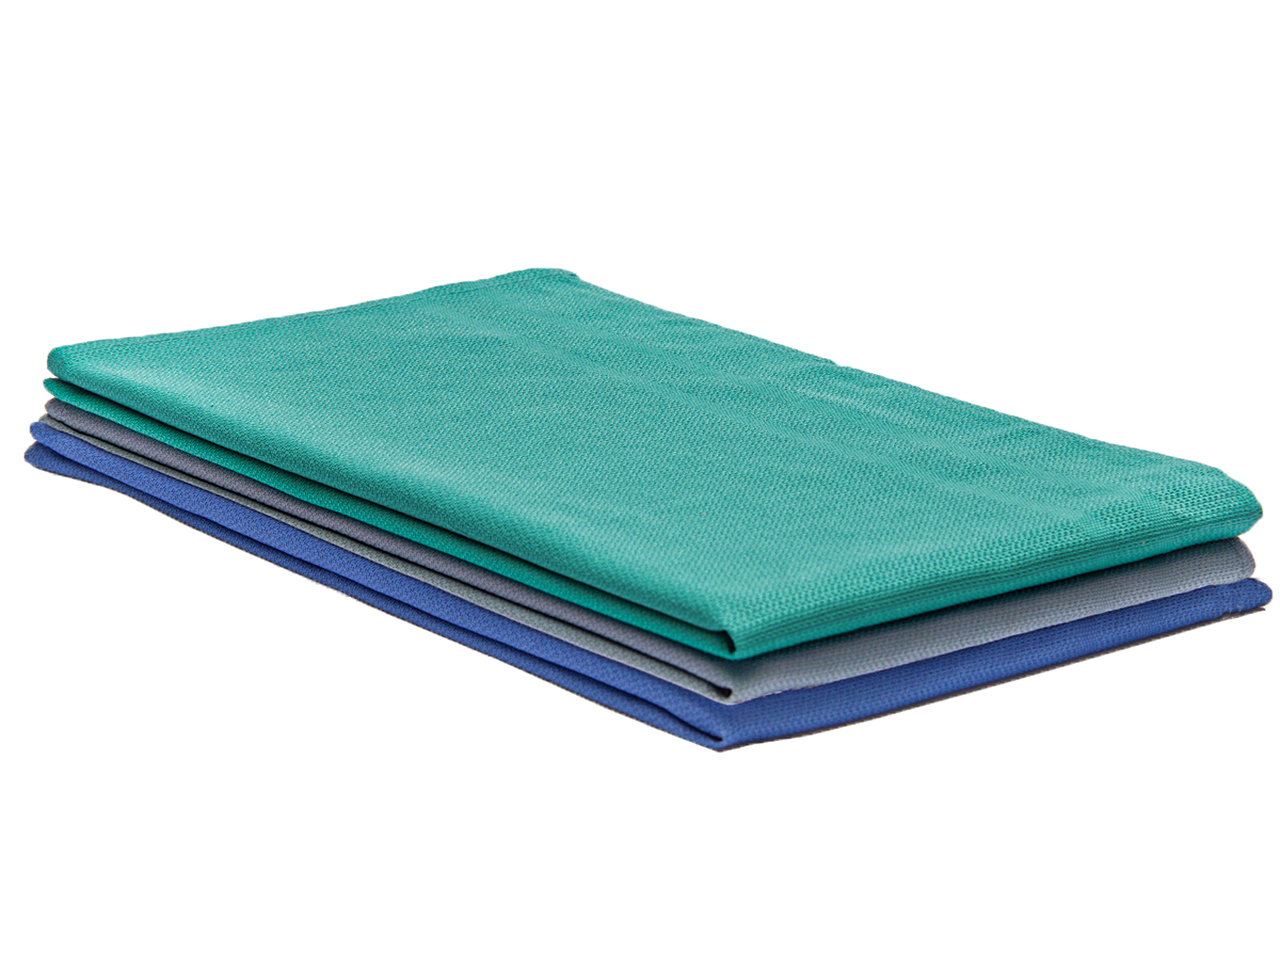 Buy Wholesale New Blue Huck Towels - Free Shipping